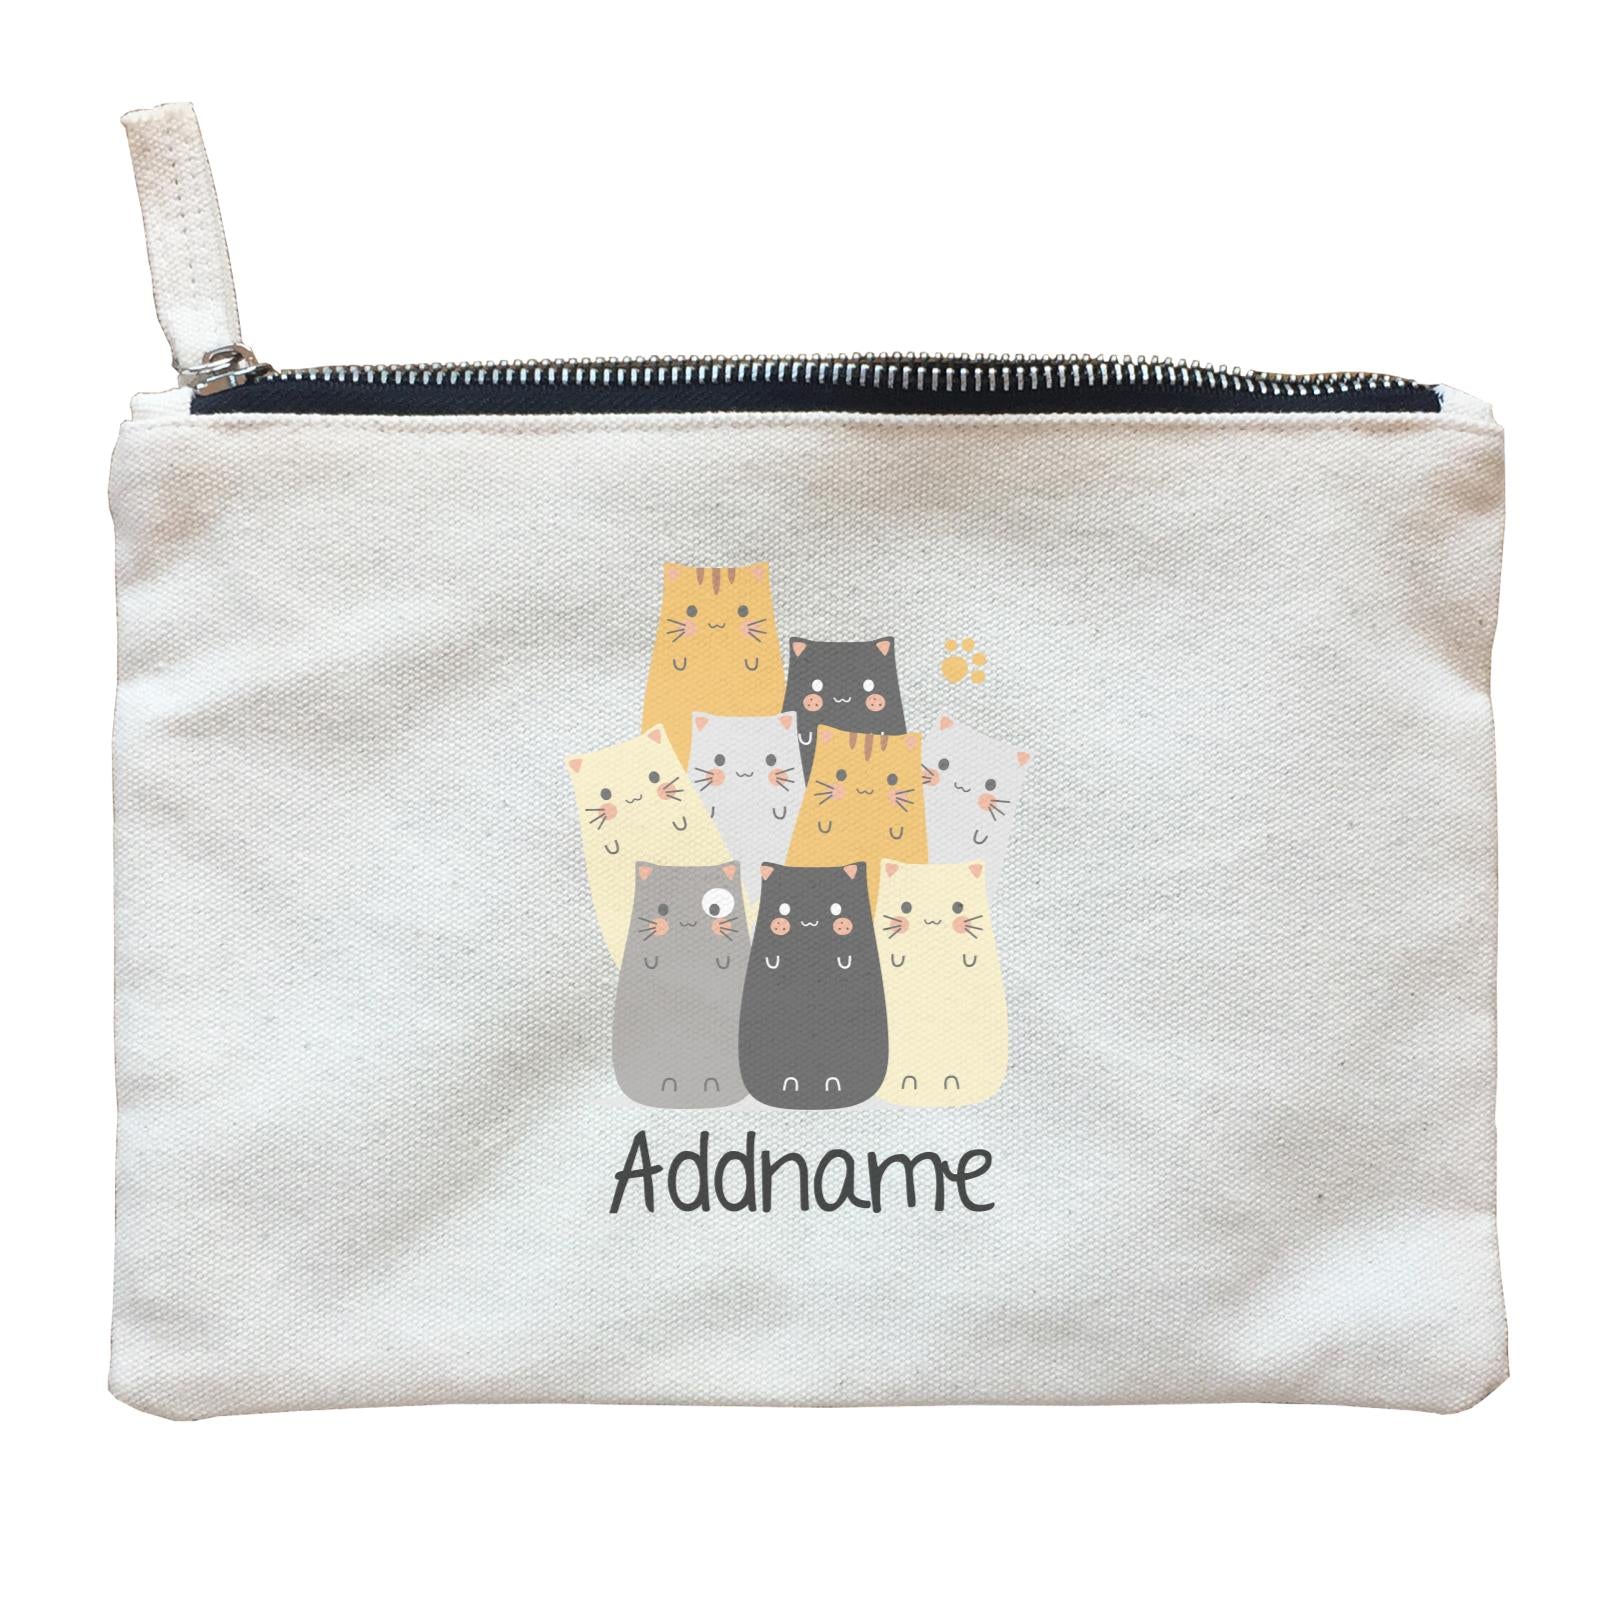 Cute Animals And Friends Series Cute Long Cats Group Addname Zipper Pouch